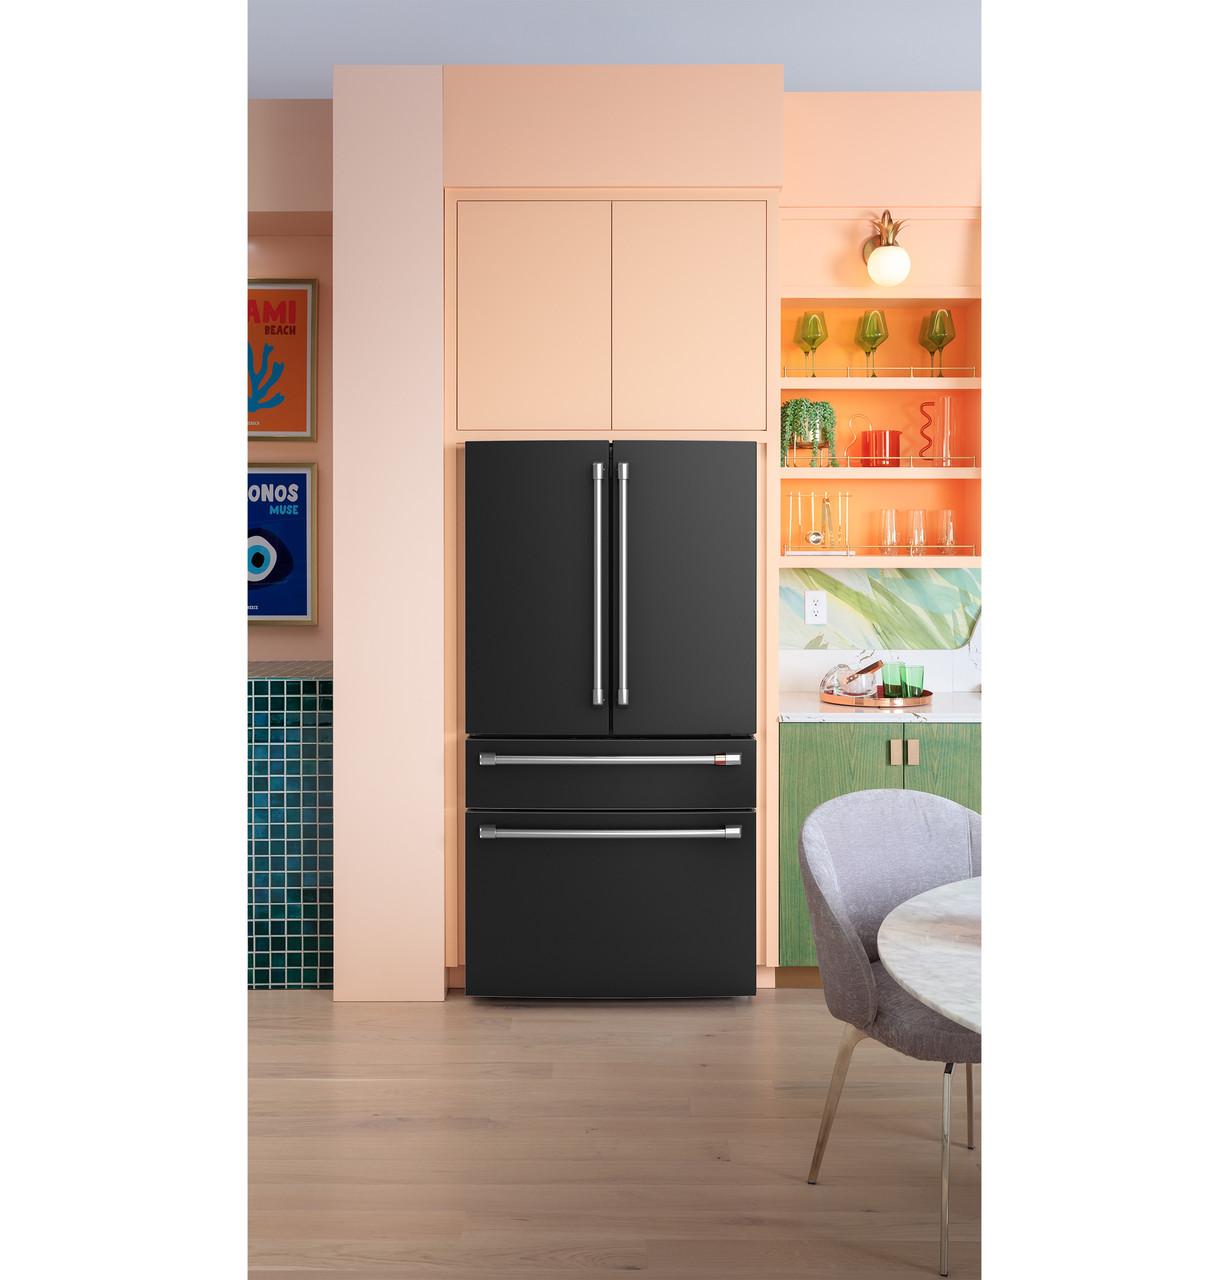 Cafe CGE29DP3TD1 Café&#8482; Energy Star® 28.7 Cu. Ft. Smart 4-Door French-Door Refrigerator With Dual-Dispense Autofill Pitcher